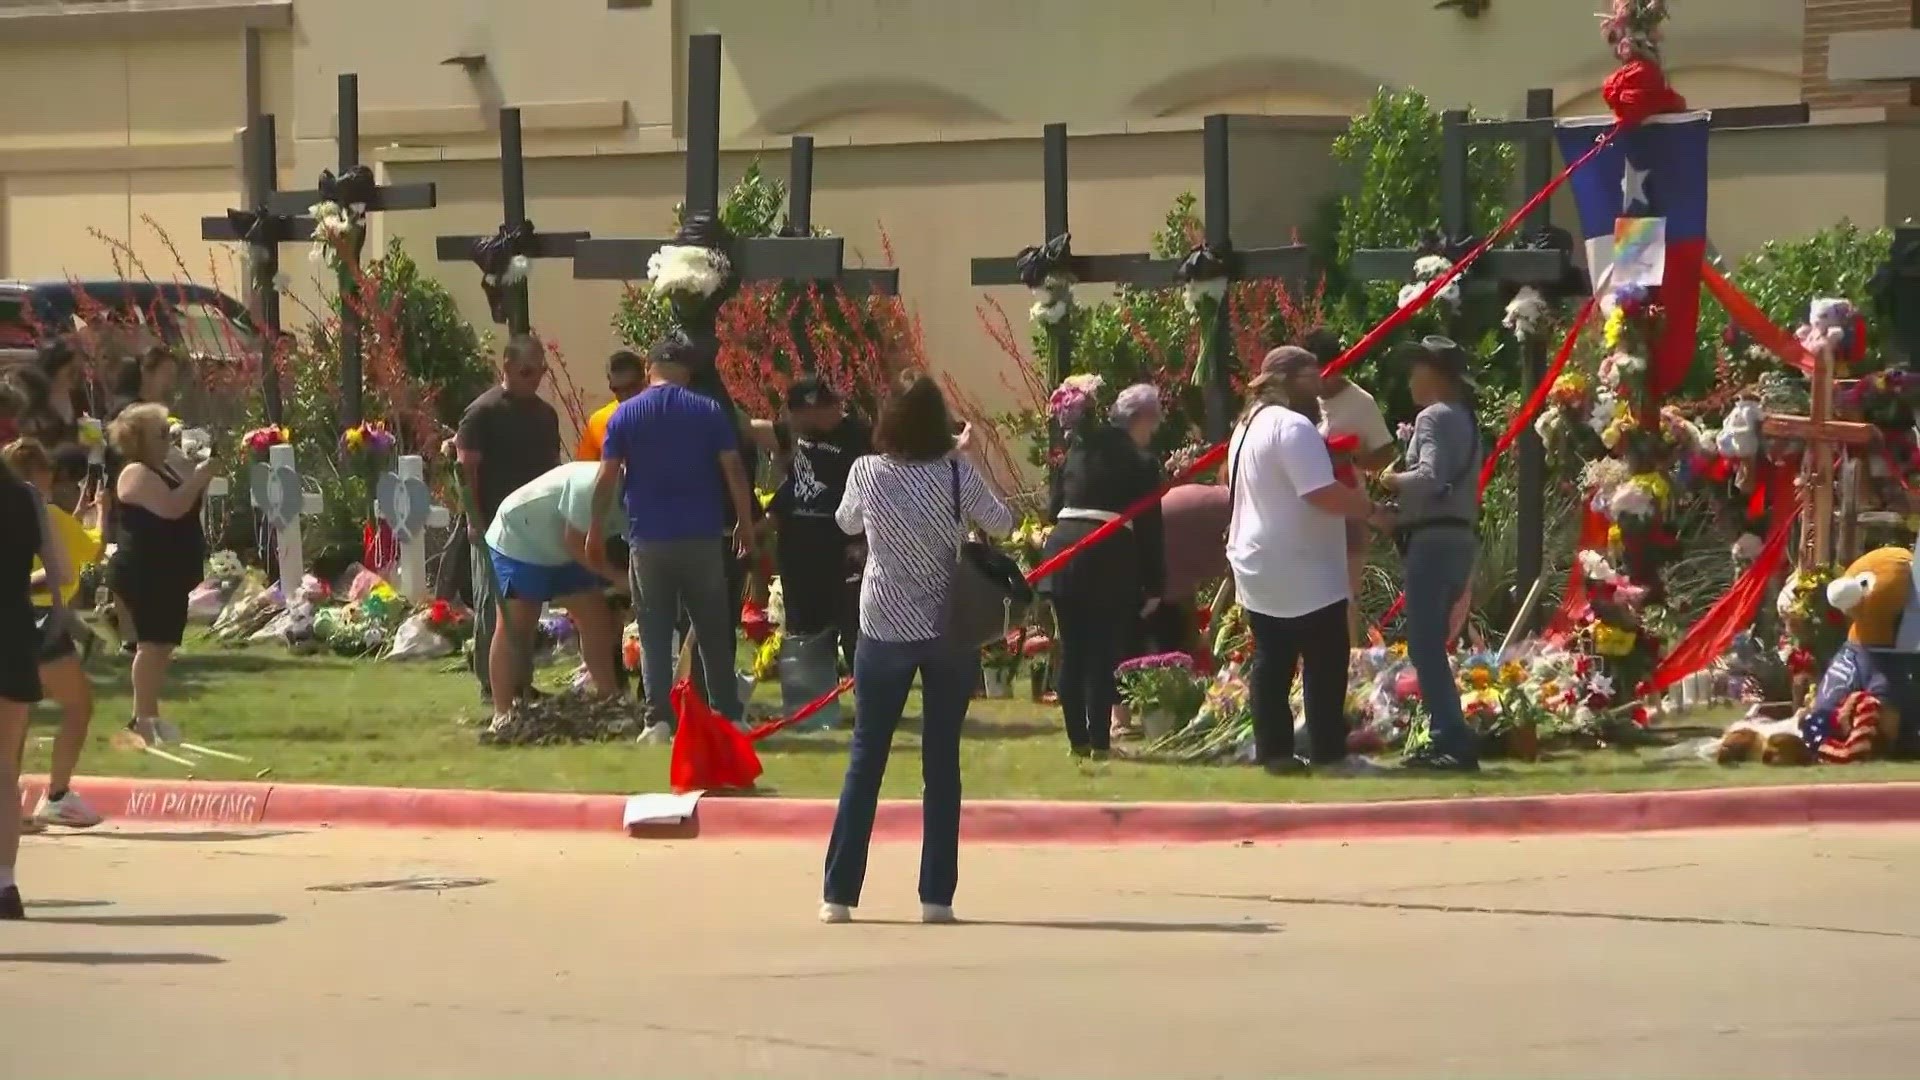 Eight people were killed after a gunman opened fire at a mall in Allen, Texas. Among the victims are a security guard and a young engineer from McKinney, Texas.